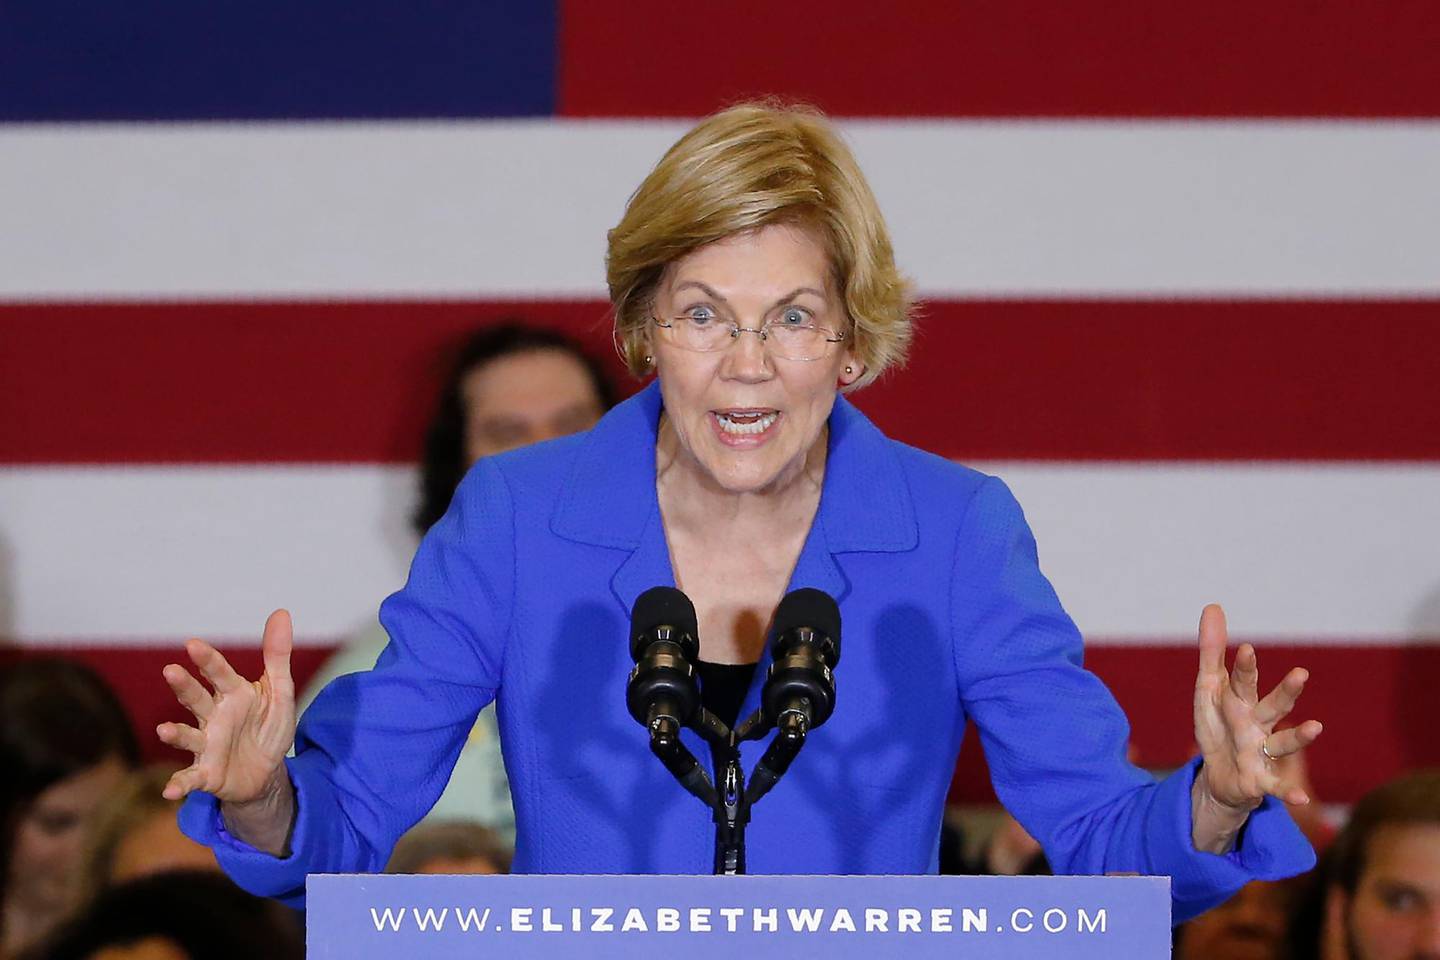 Democratic presidential candidate Sen. Elizabeth Warren, D-Mass., speaks to supporters at a caucus night campaign rally, Monday, Feb. 3, 2020, in Des Moines, Iowa. (AP Photo/Sue Ogrocki)